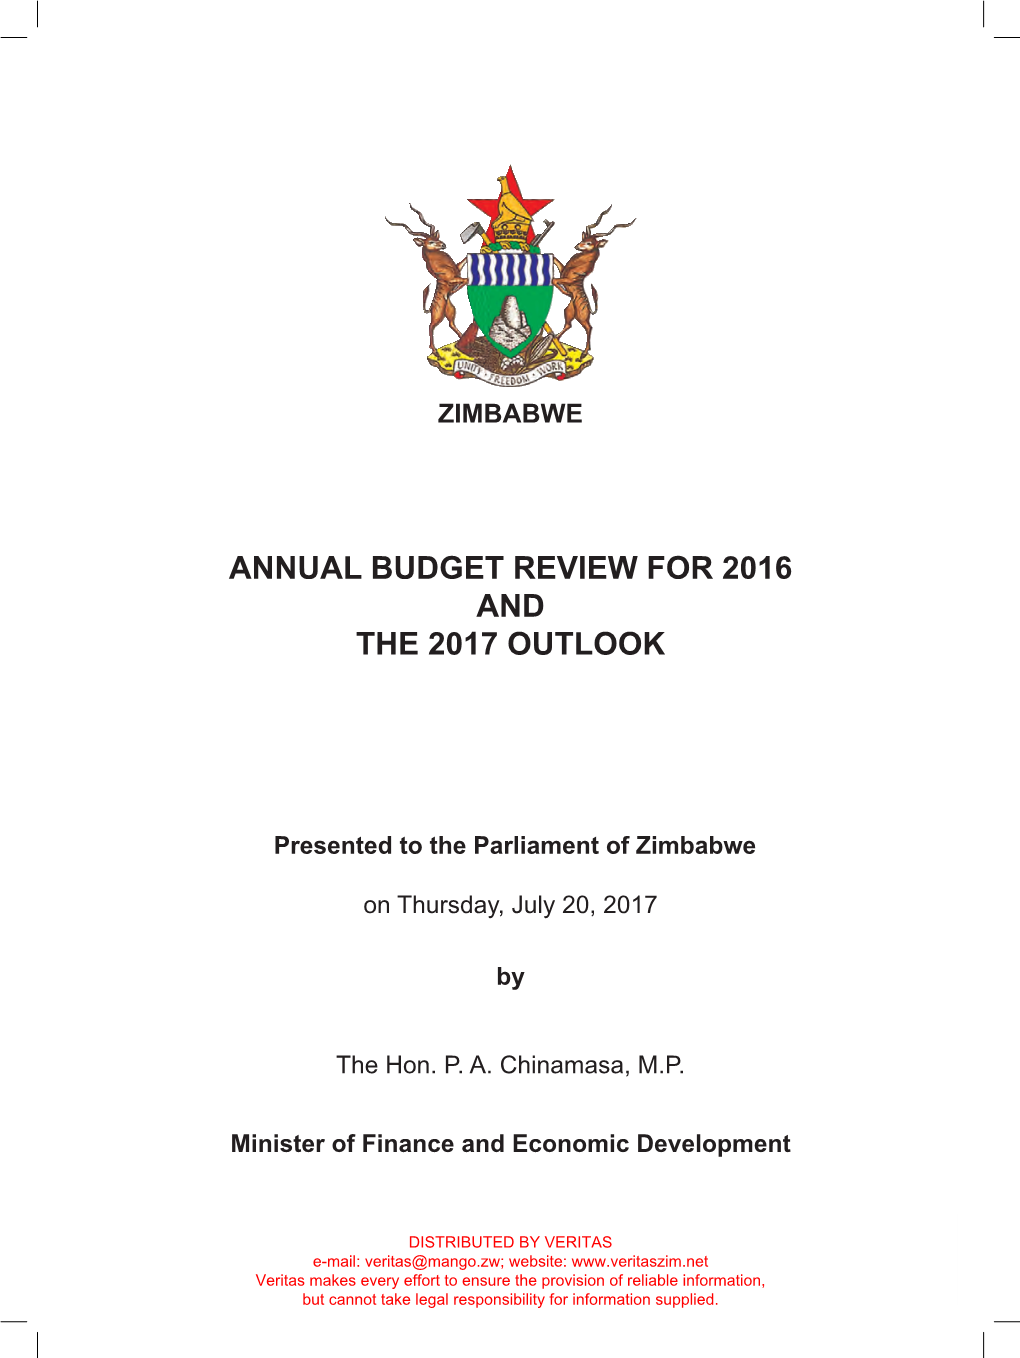 Annual Budget Review for 2016 and the 2017 Outlook